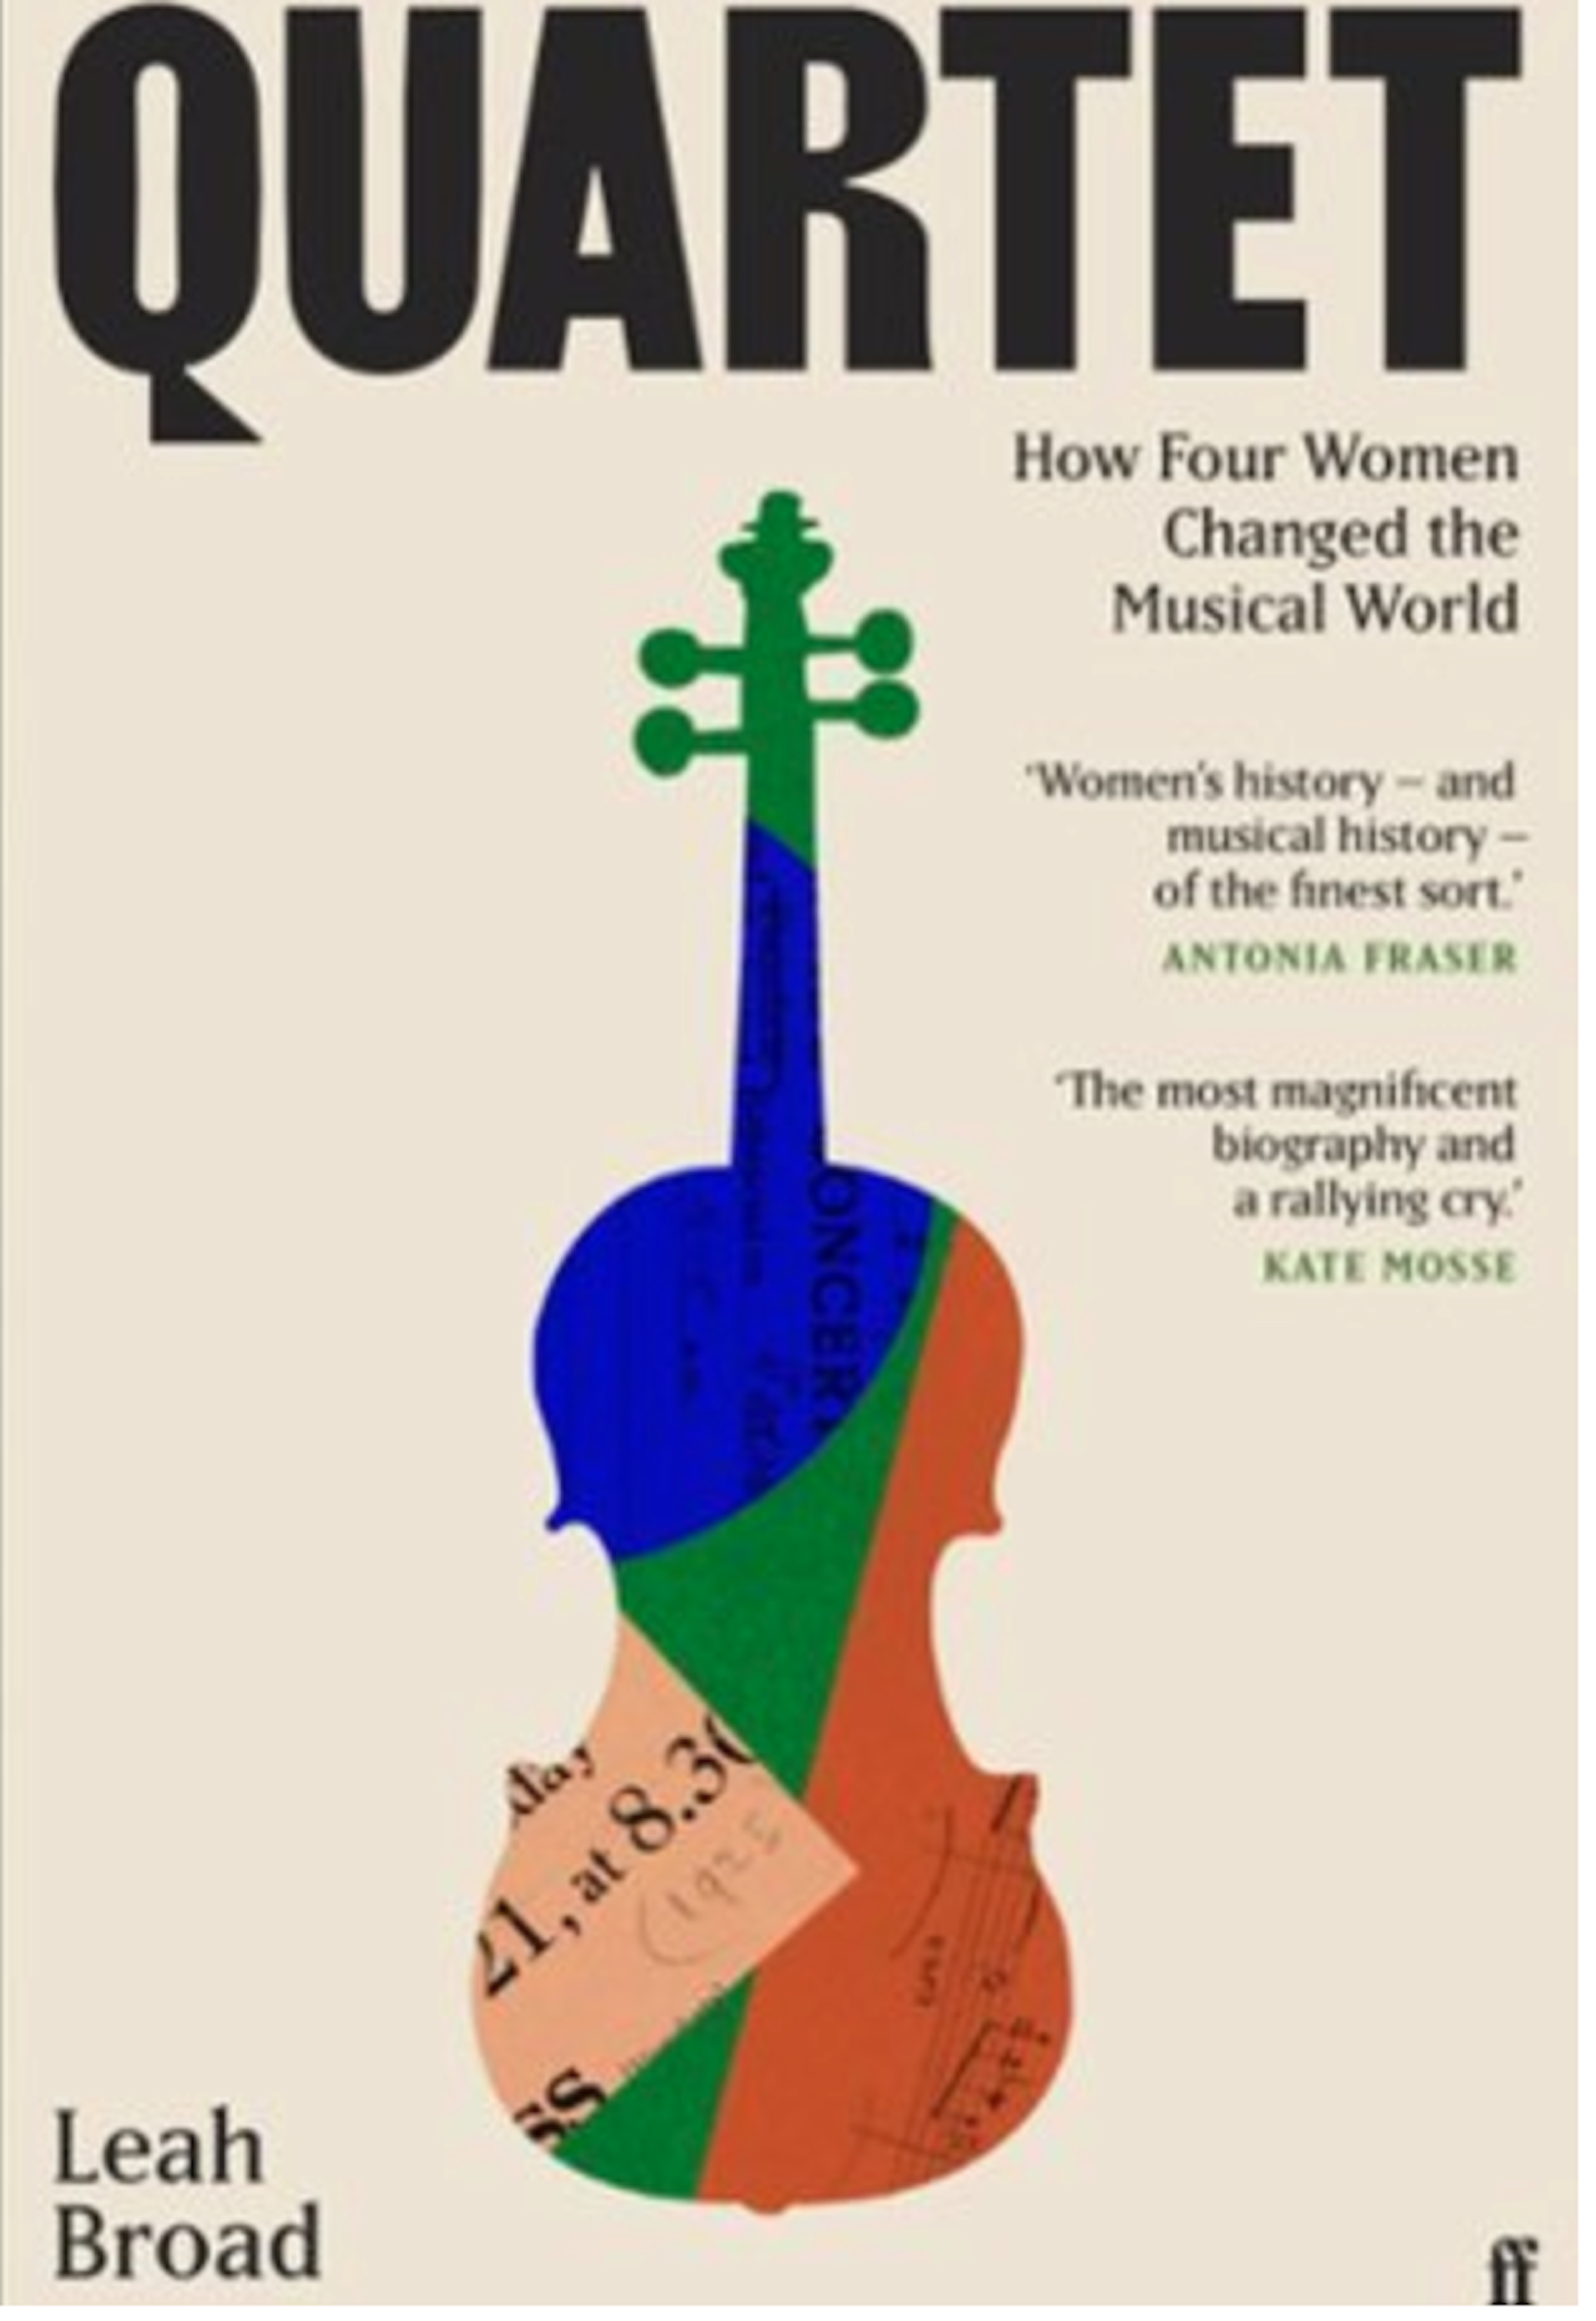 Quartet review did four women really change the world of classical music?